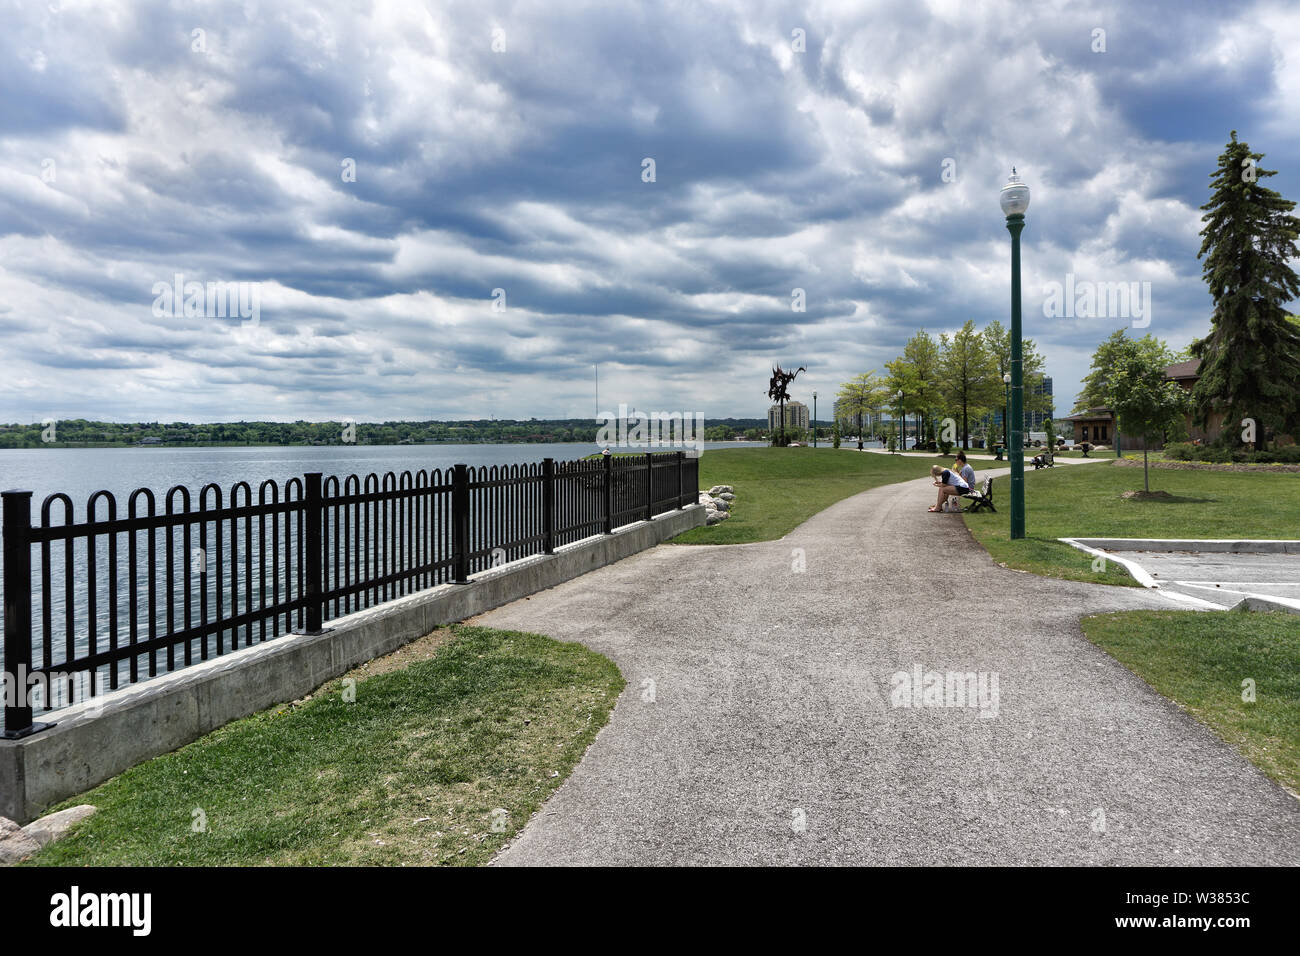 Relaxing in the park of Barrie, enjoying silence with view on the lake, Canada, Ontario Stock Photo